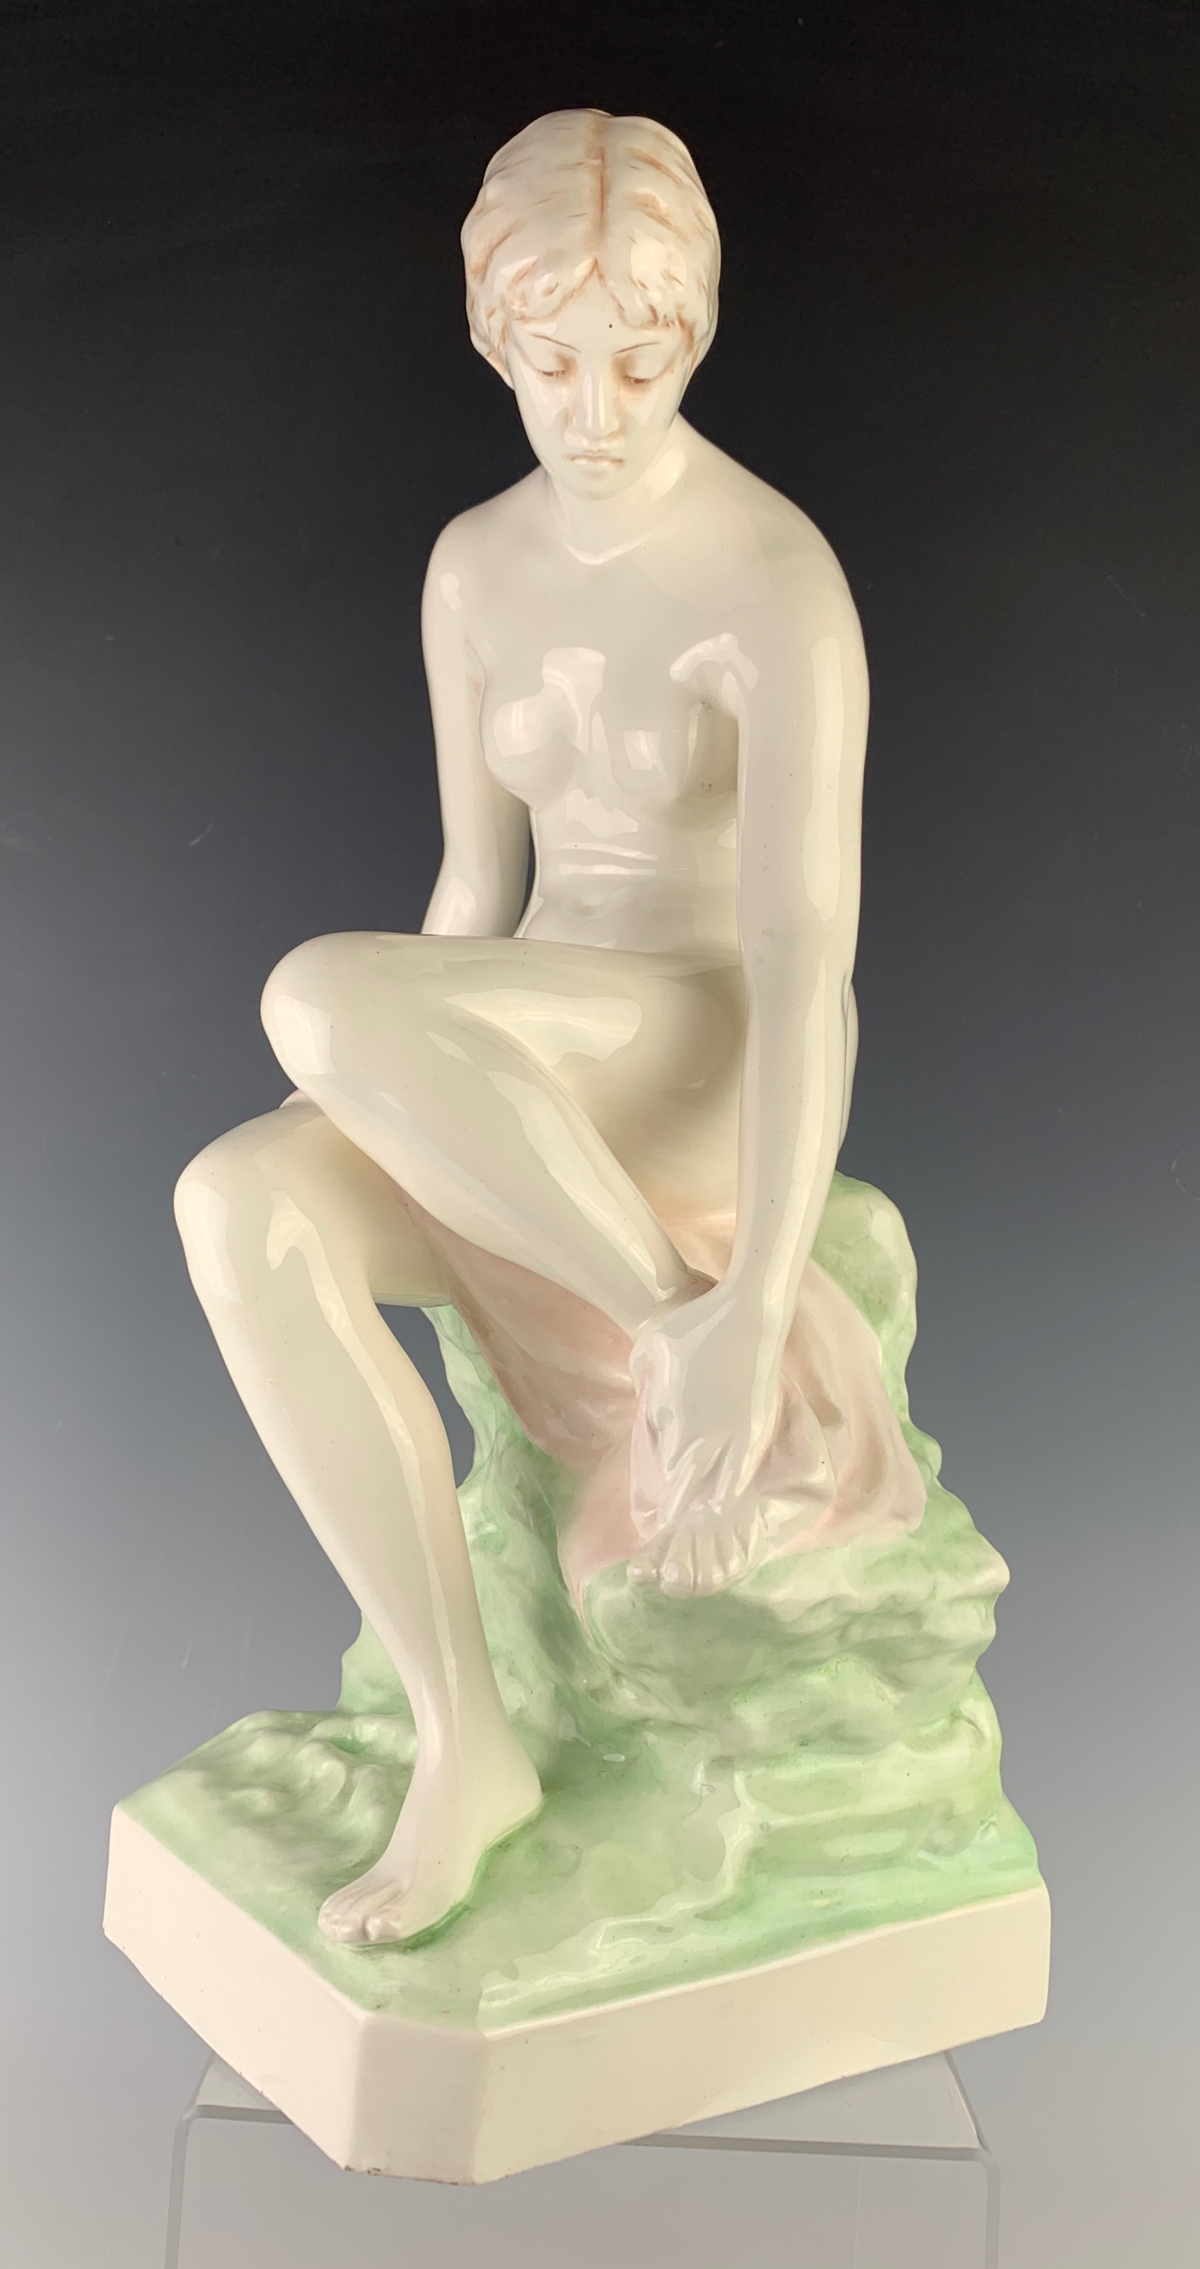 Nude Figurine by Royal Dux